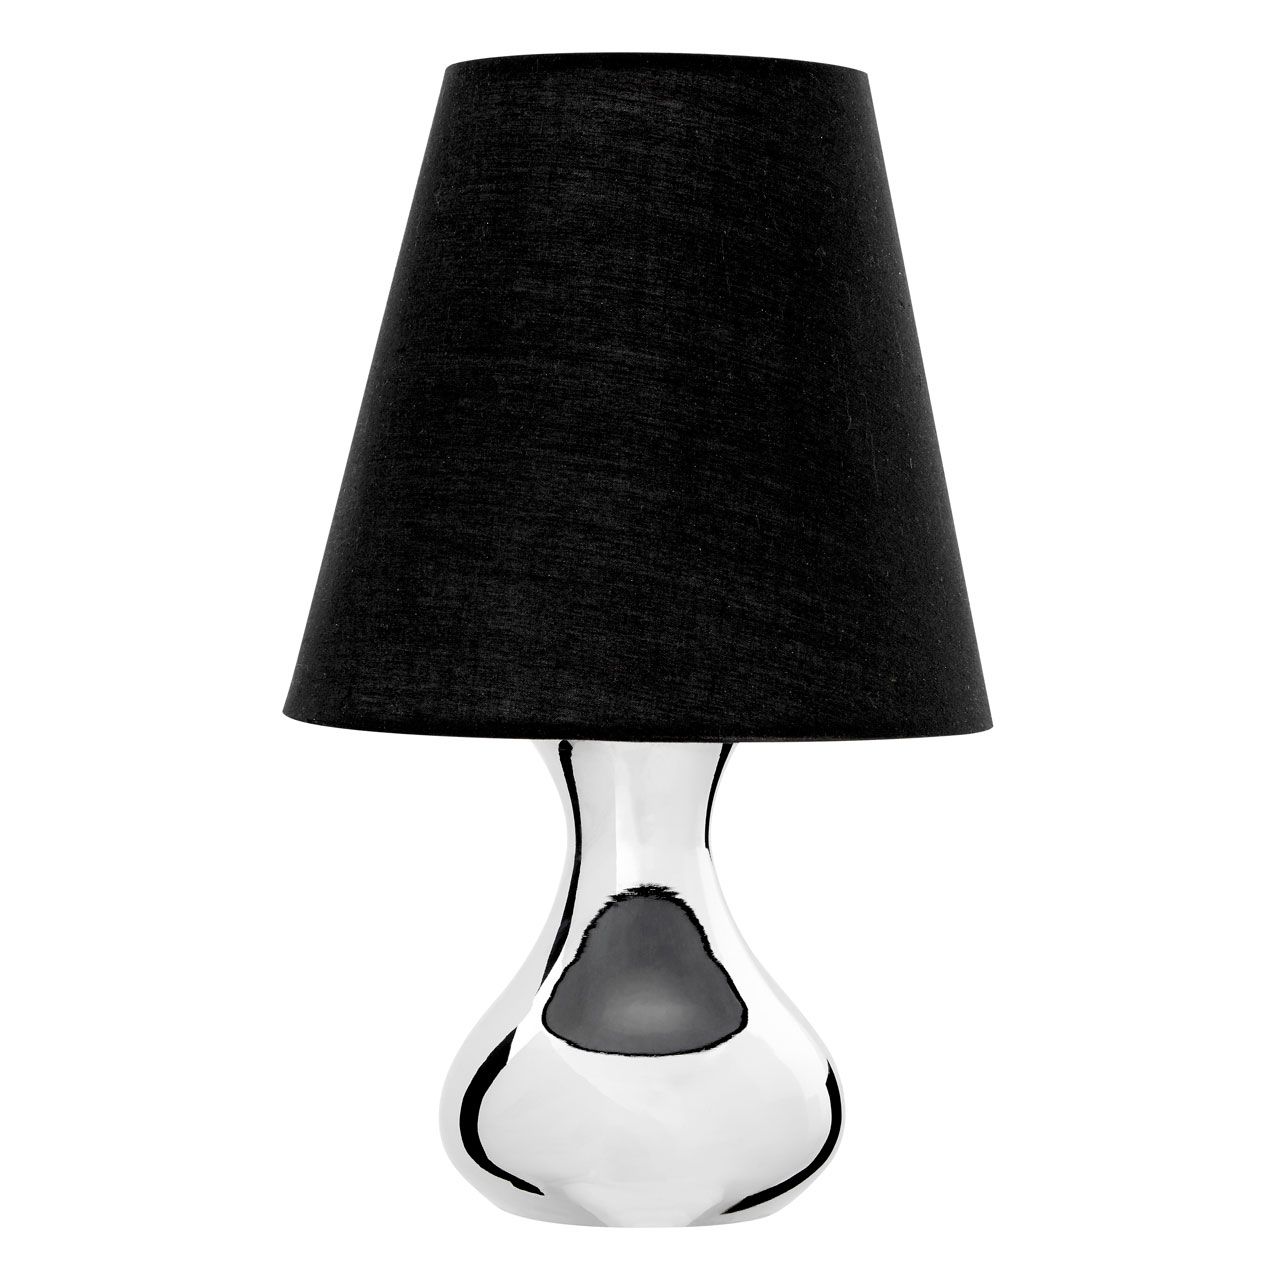 Homewares Nell Black Fabric Shade Table Lamp